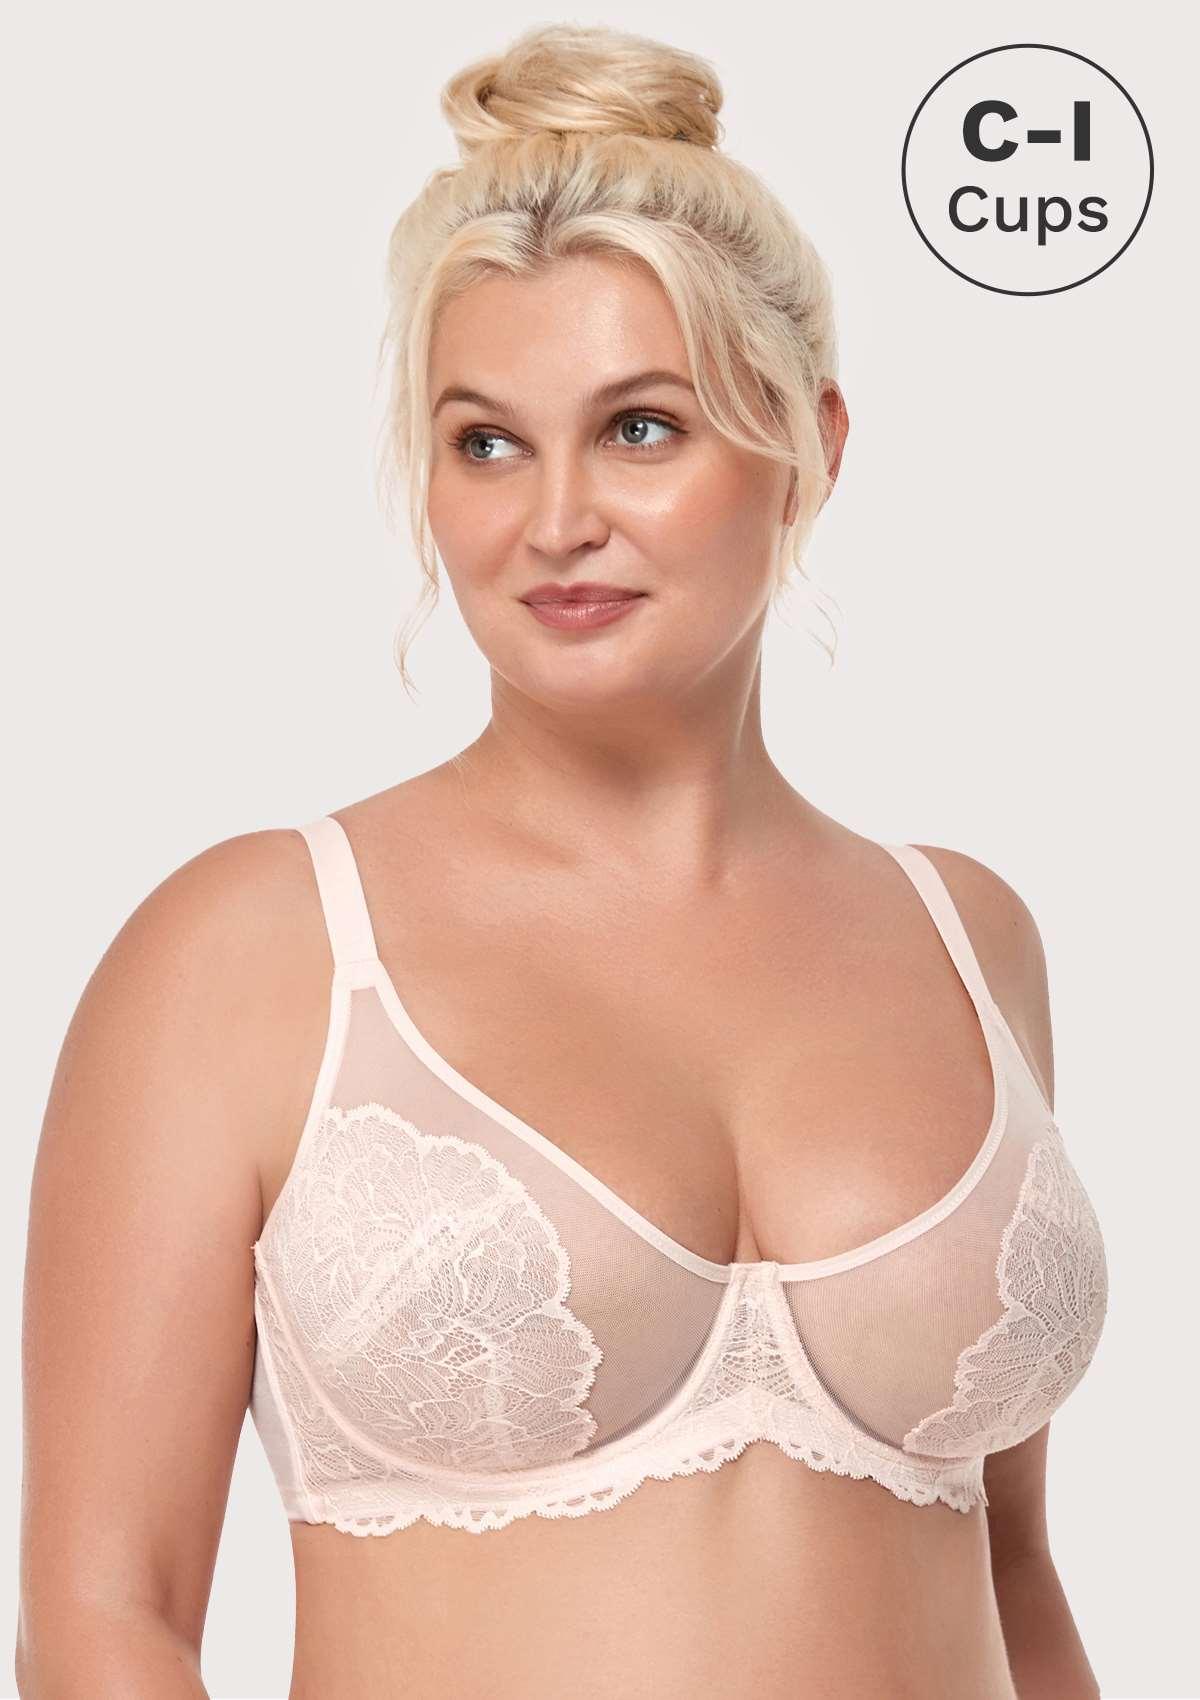 HSIA Blossom Matching Lacey Underwear And Bra Set: Sexy Lace Bra - Dusty Peach / 46 / C